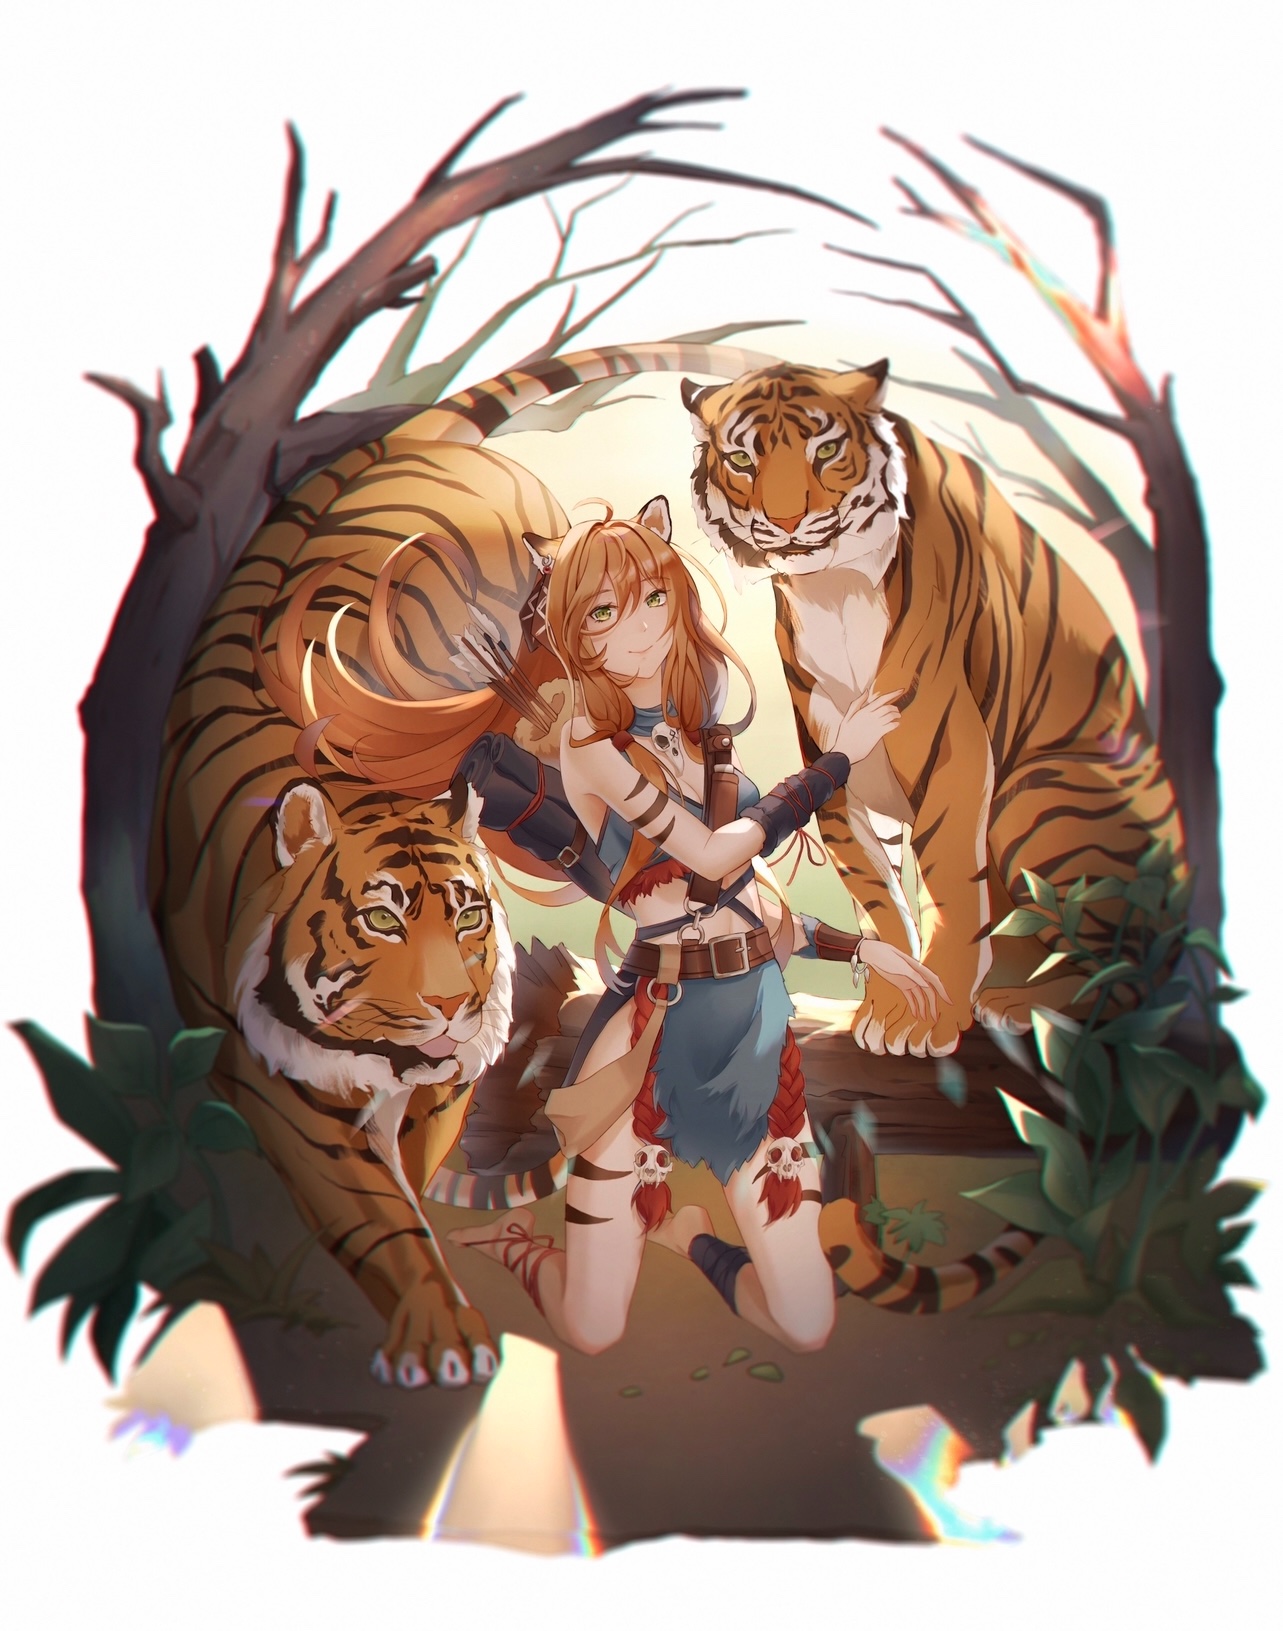 With the Tiger 🐅 带背景立绘